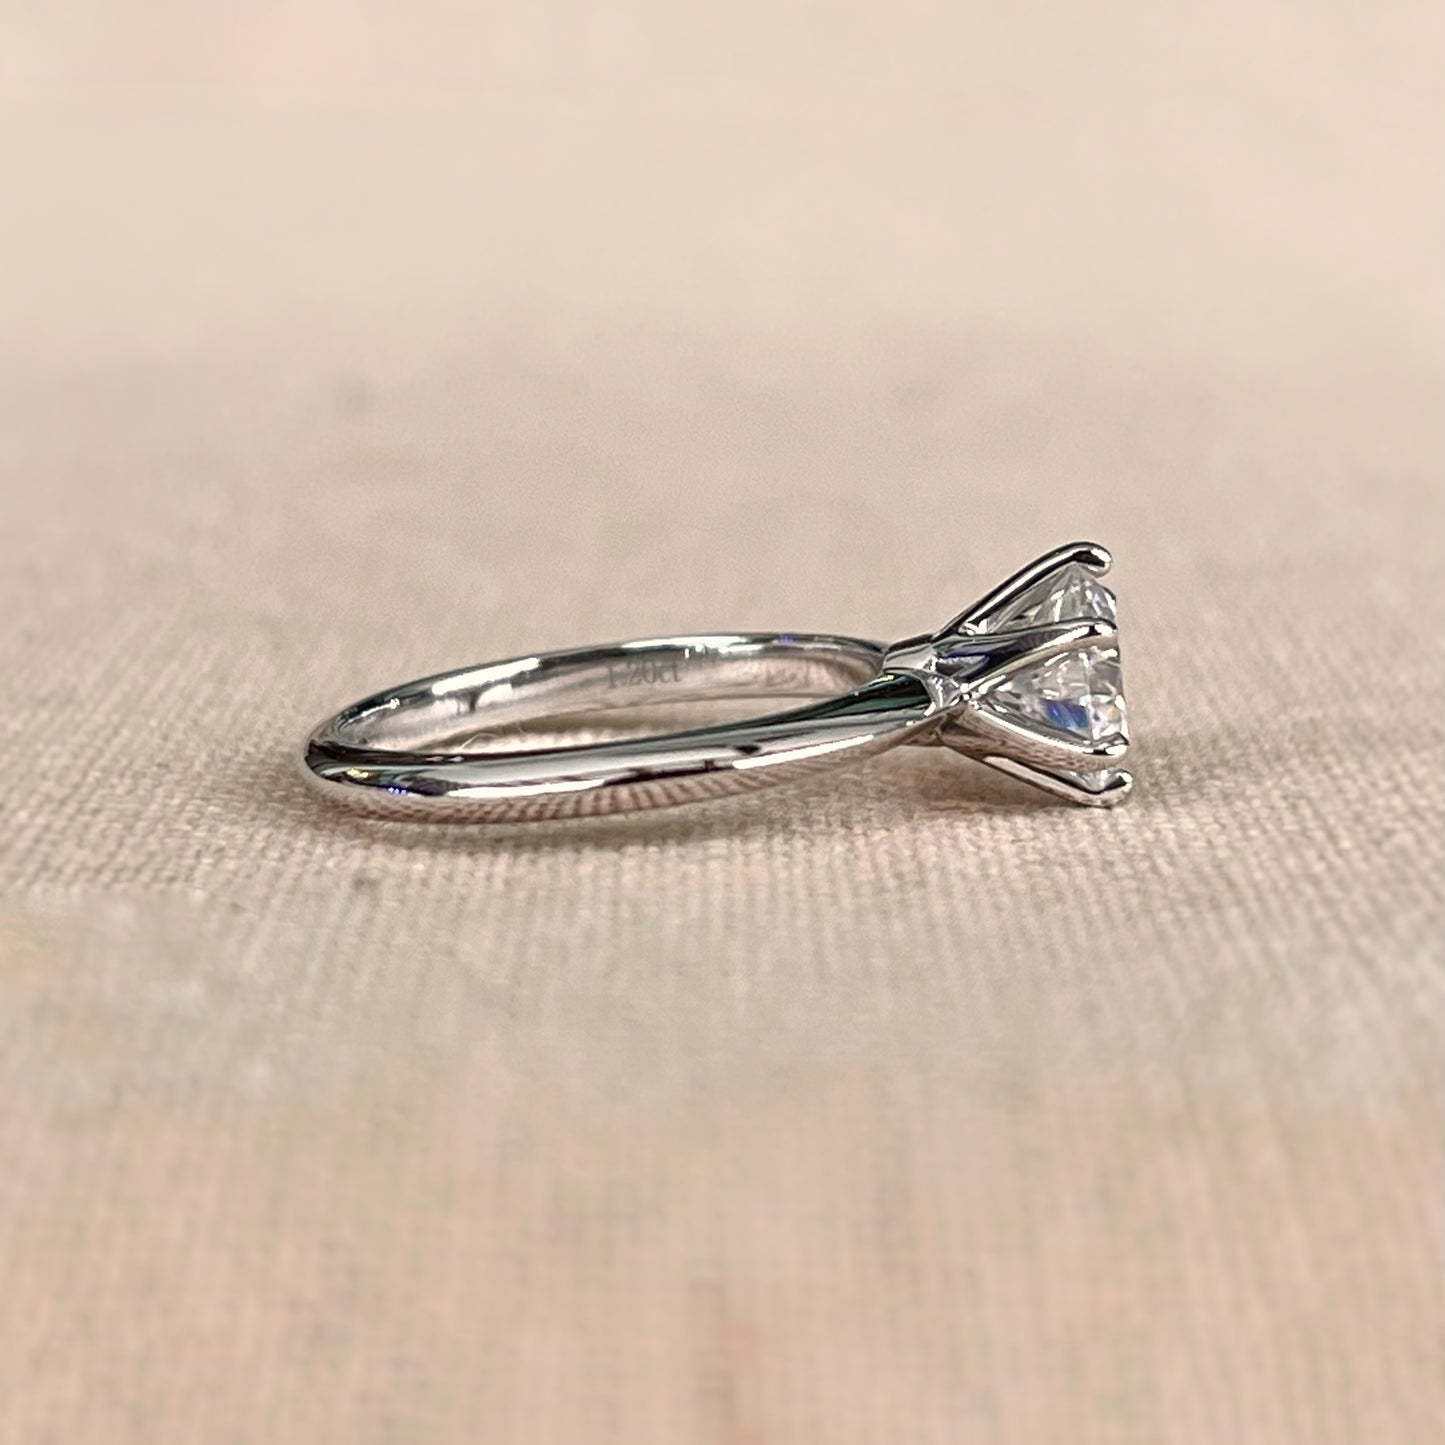 1.2ct Tiffany Setting Solitaire in White Gold